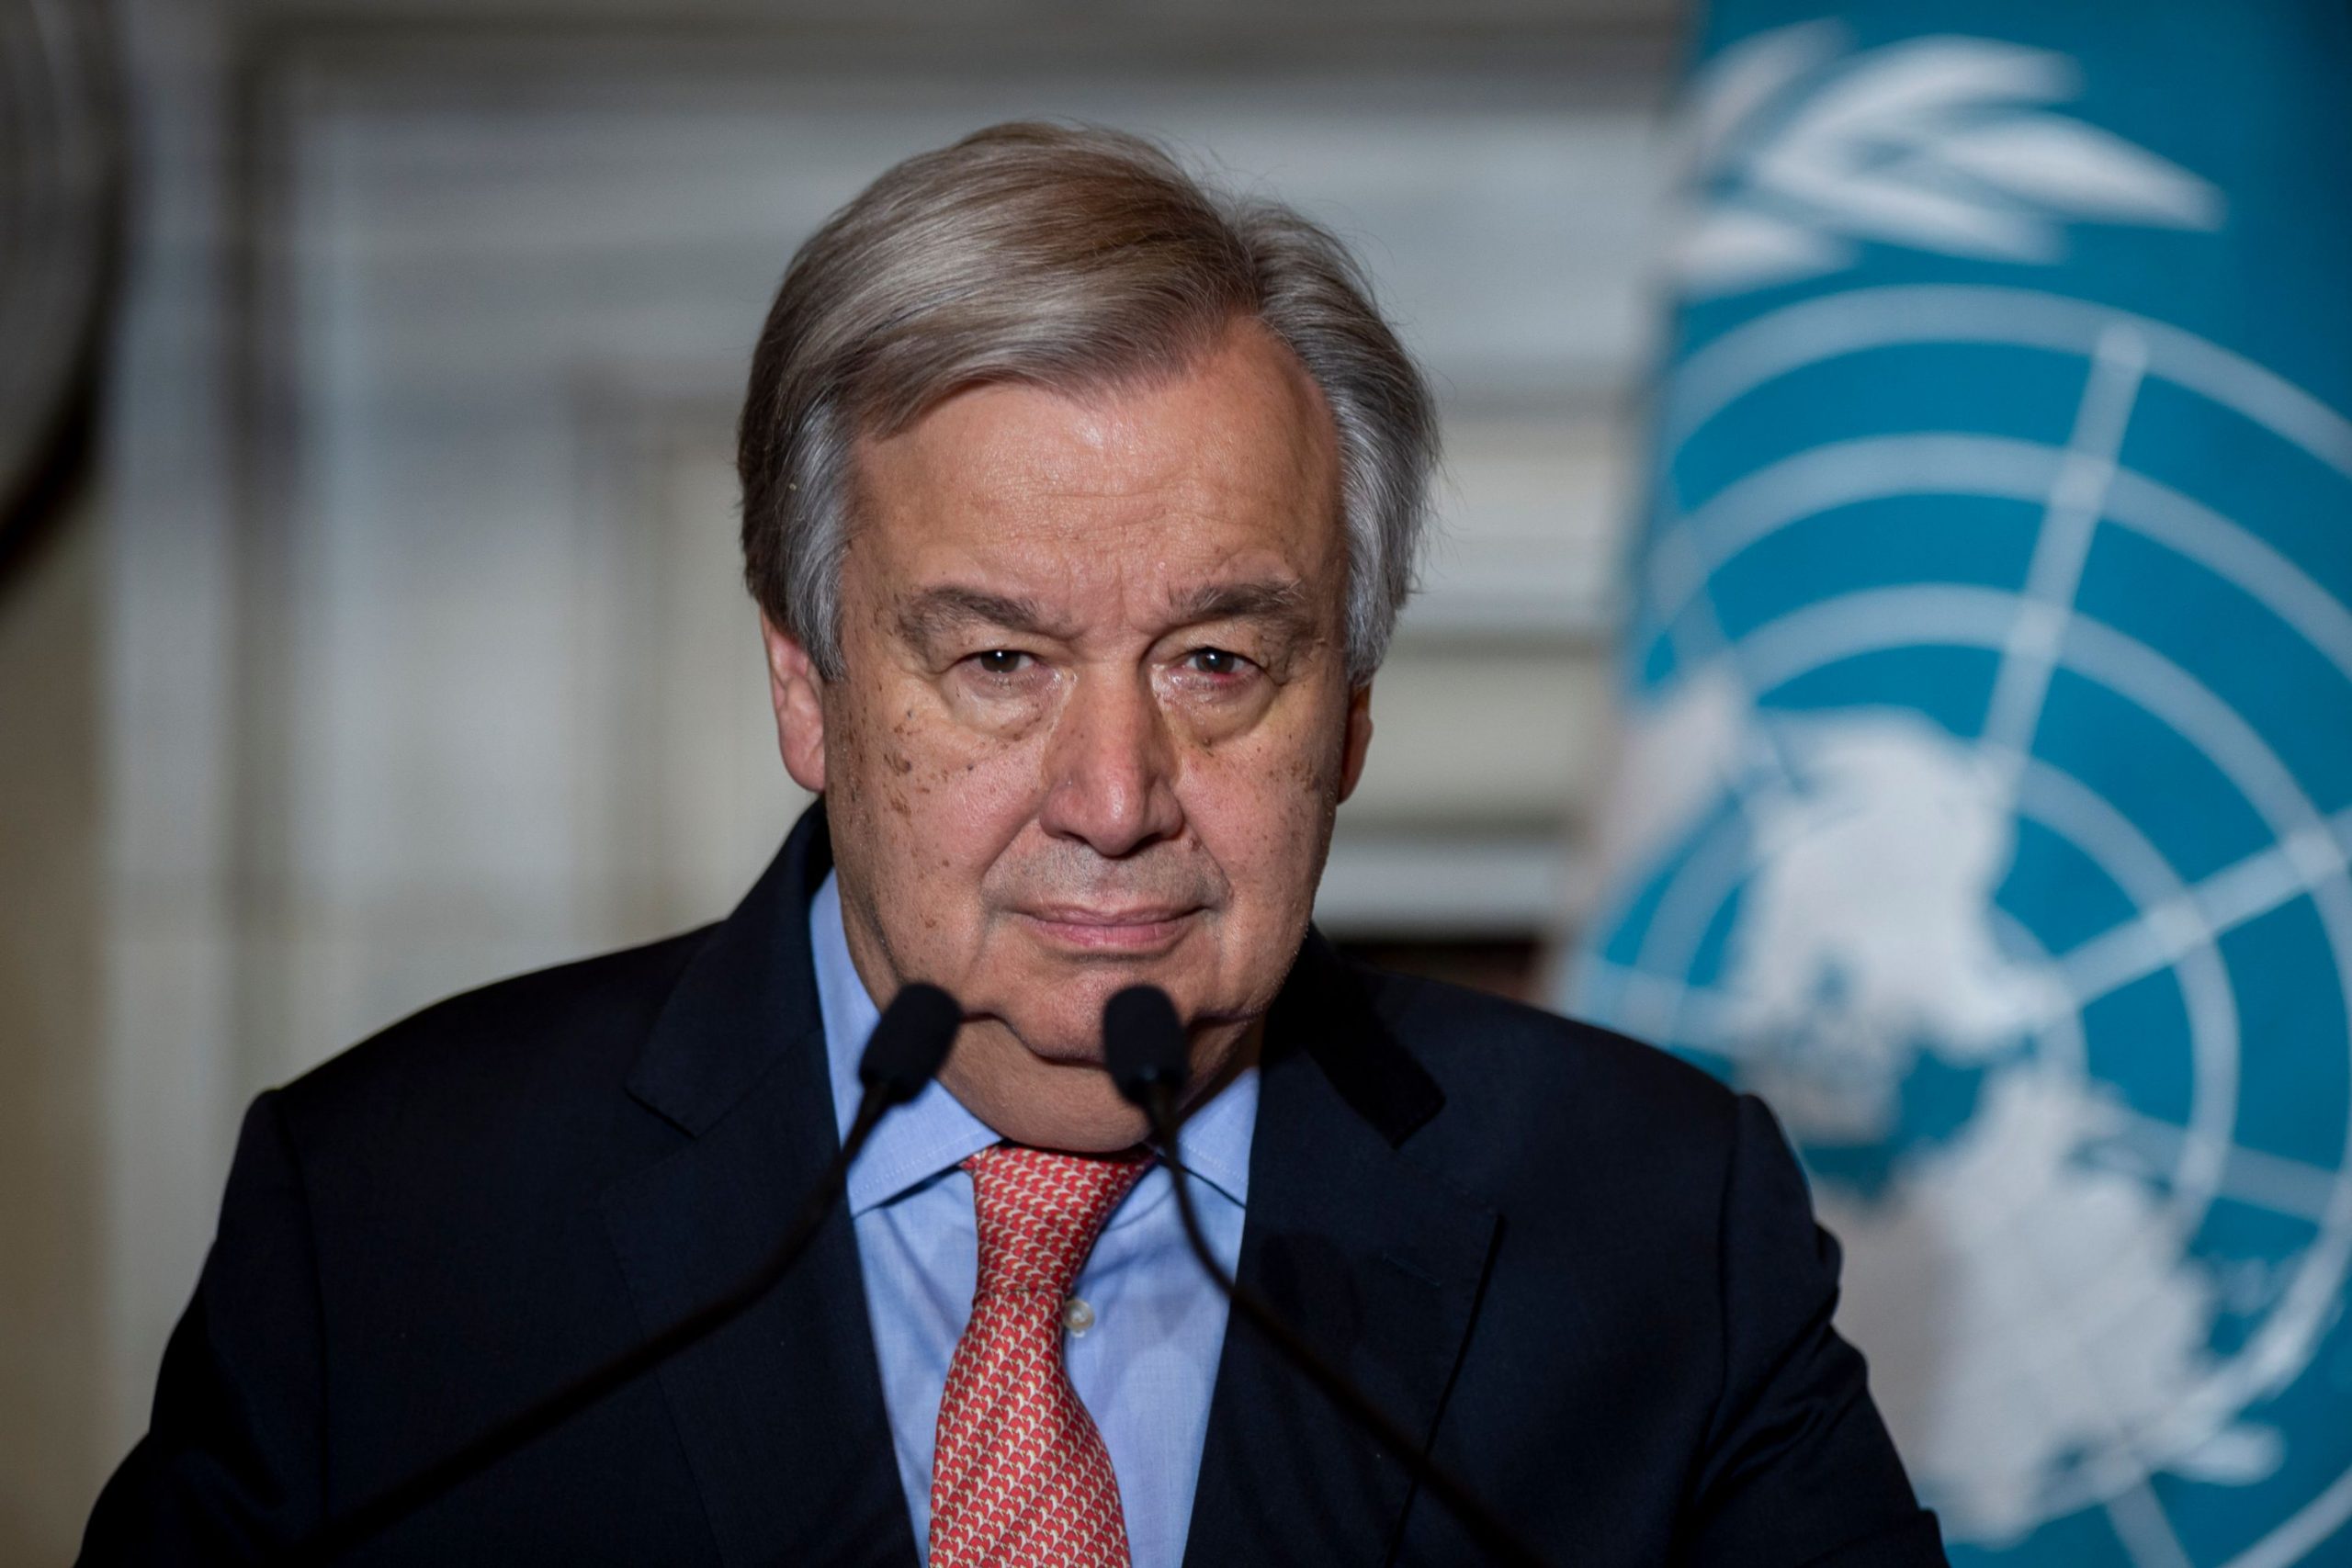 Northern Nigeria - António Guterres Appeals for Global Ceasefire